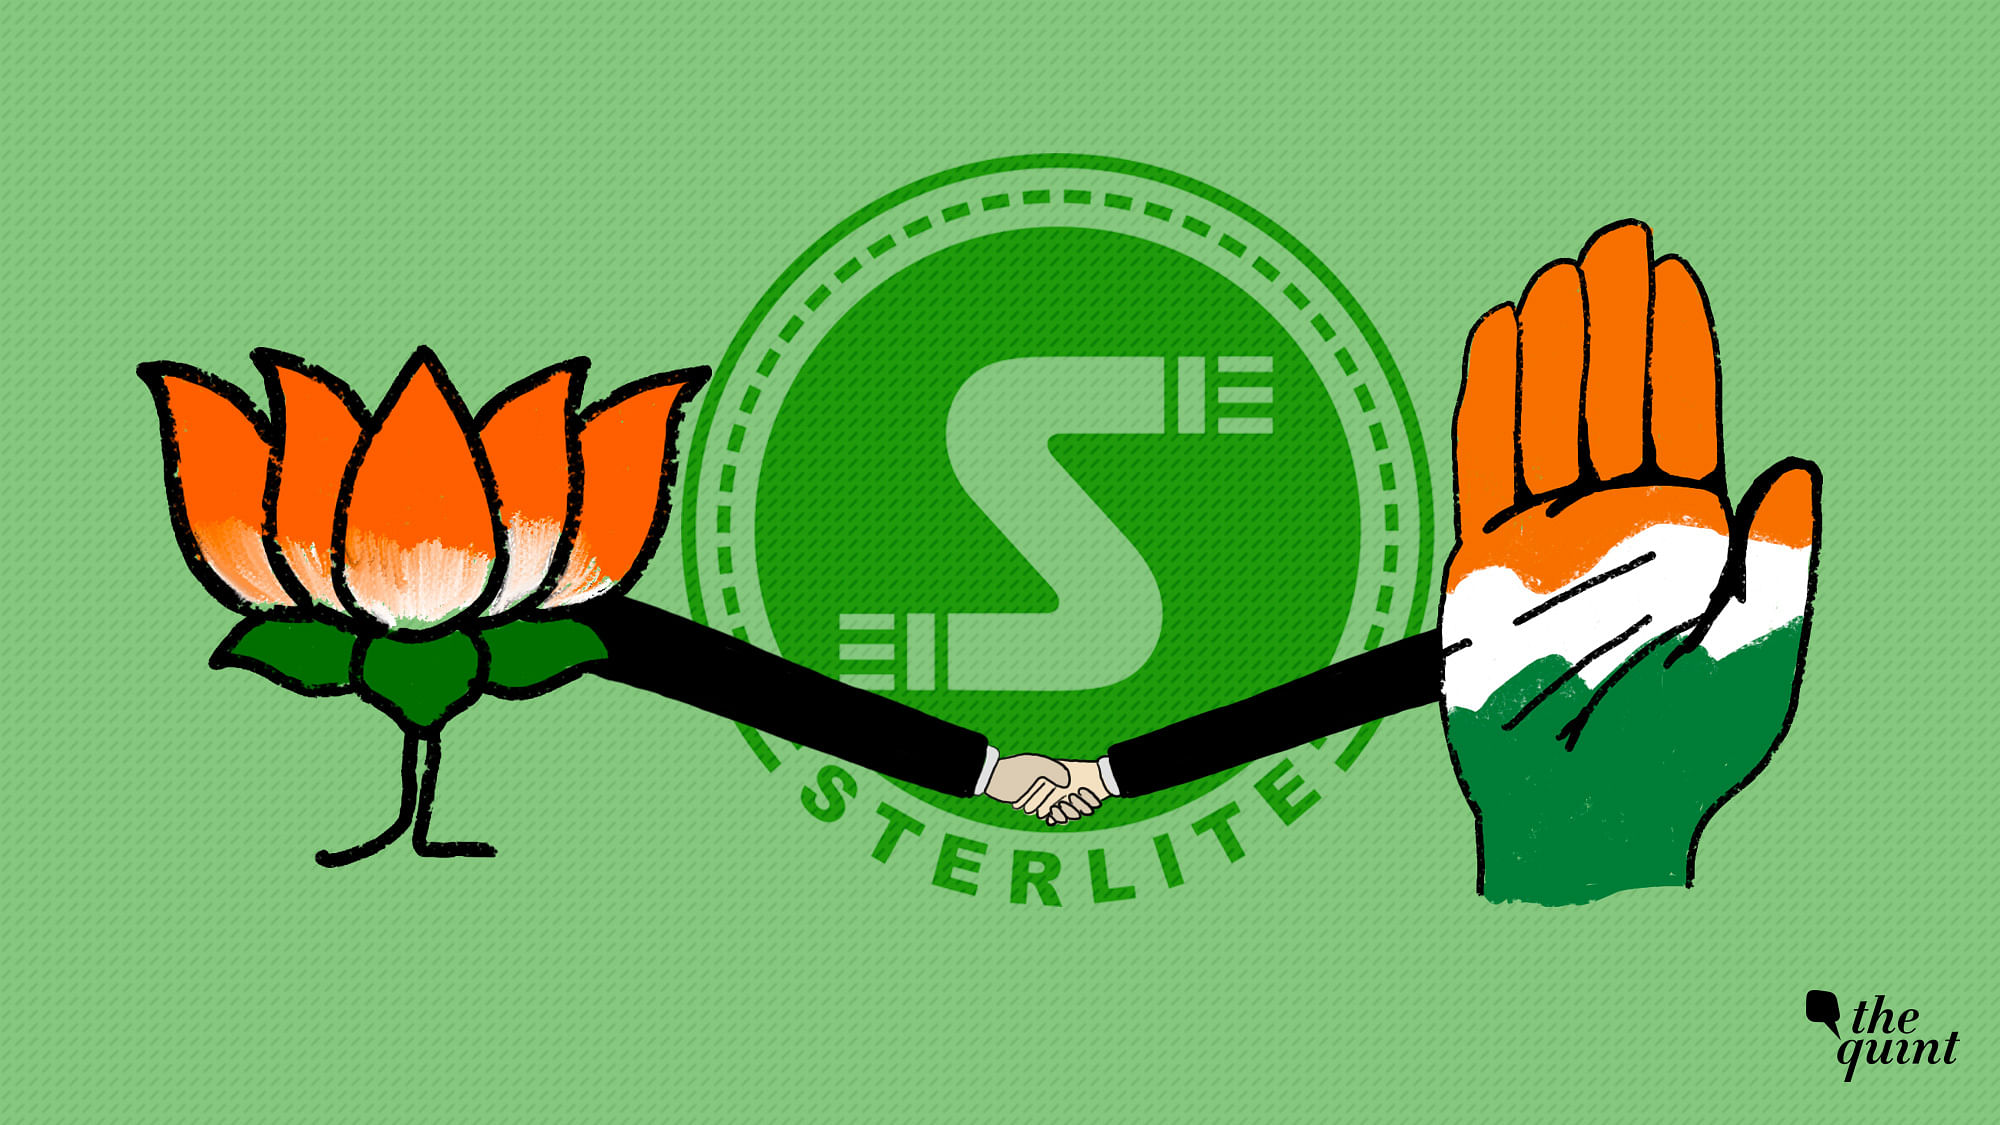 Did Sterlite get away with blatant environment violations because its a known political donor?&nbsp;